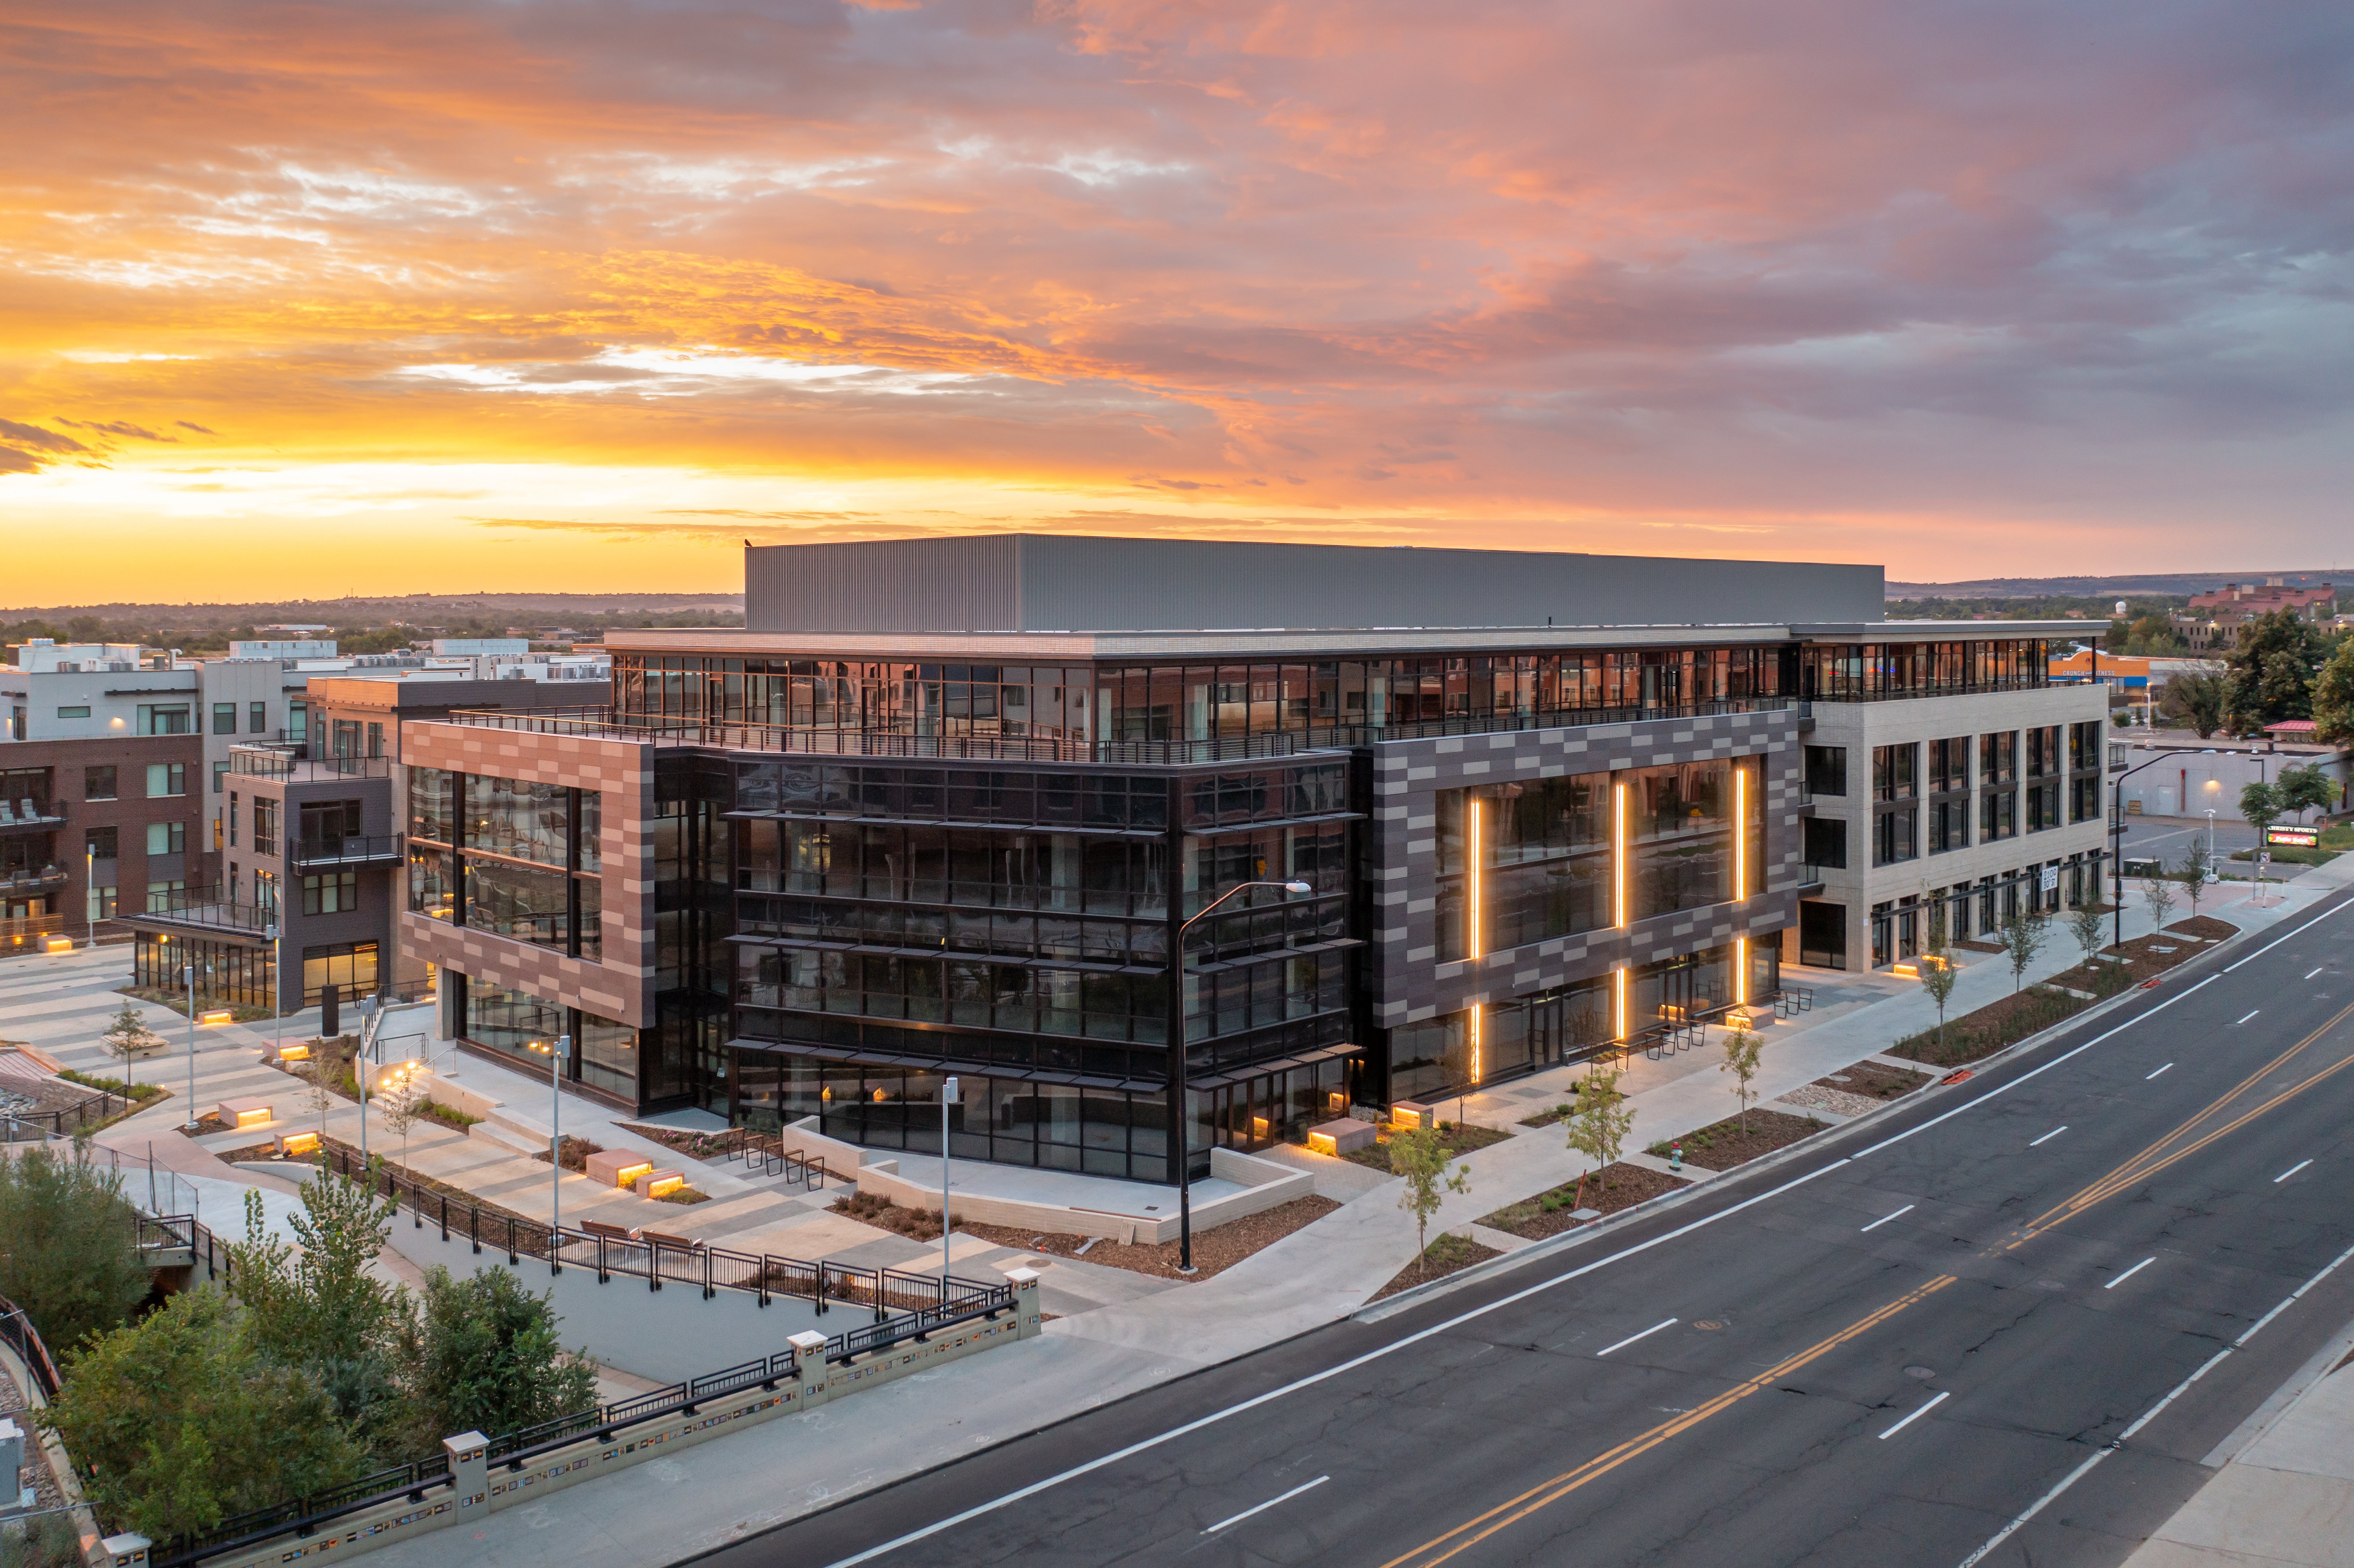 Google has purchased 125,000 square feet of office space at the Rêve development at 30th and Pearl streets in Boulder.